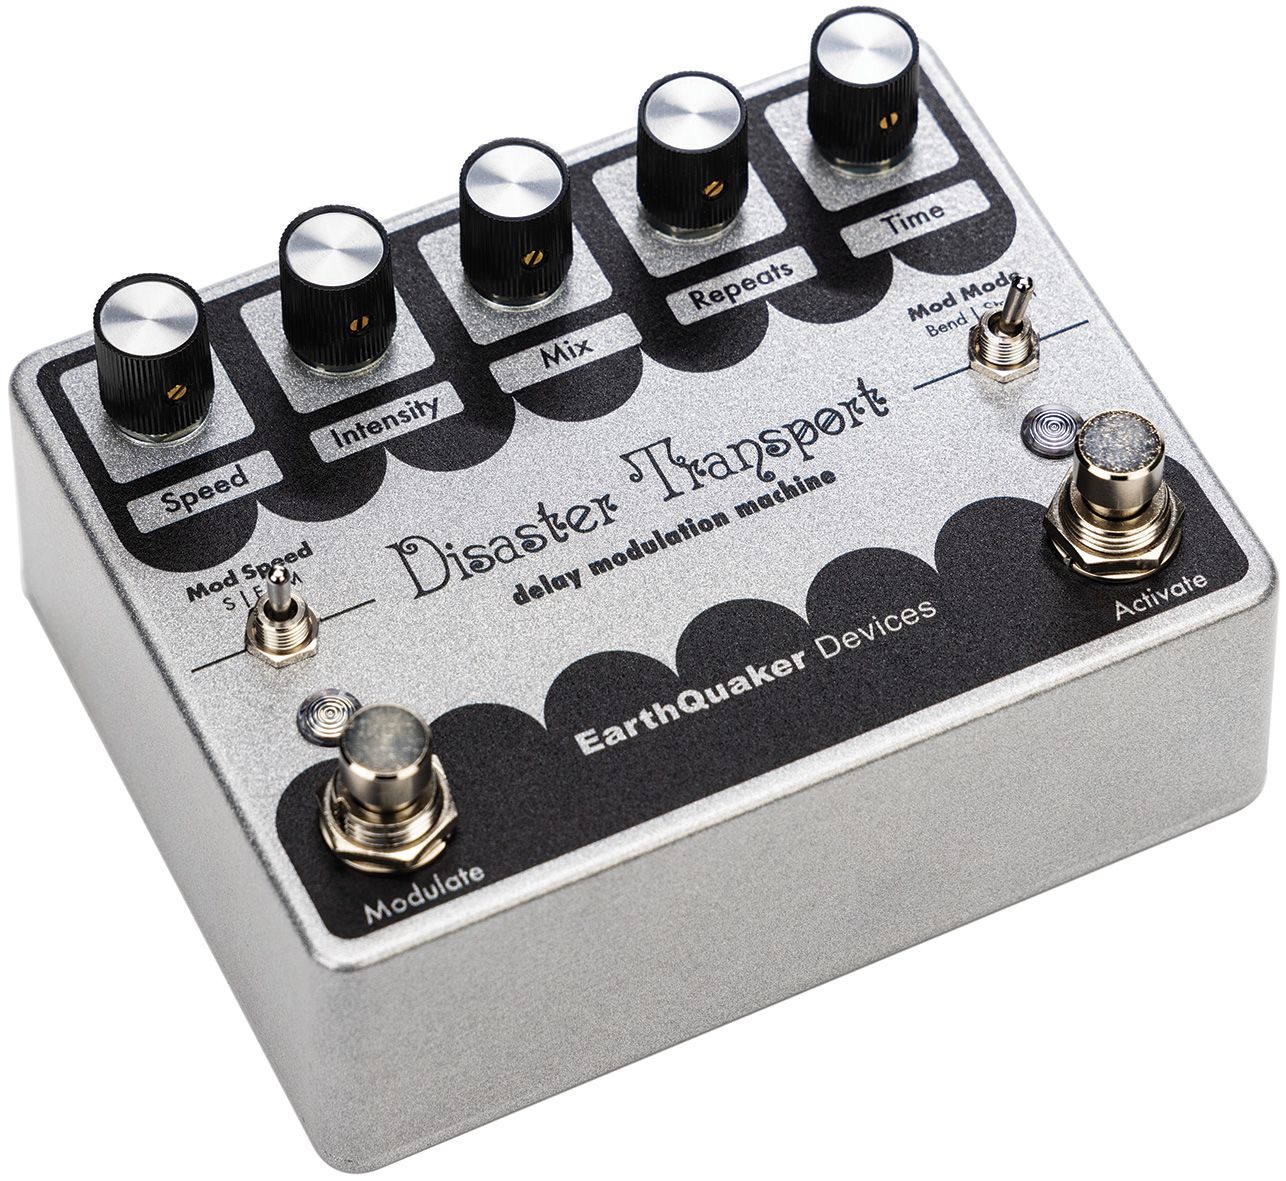 Earthquaker Disaster Transport Legacy Reissue - Reverb, delay & echo effect pedal - Variation 1